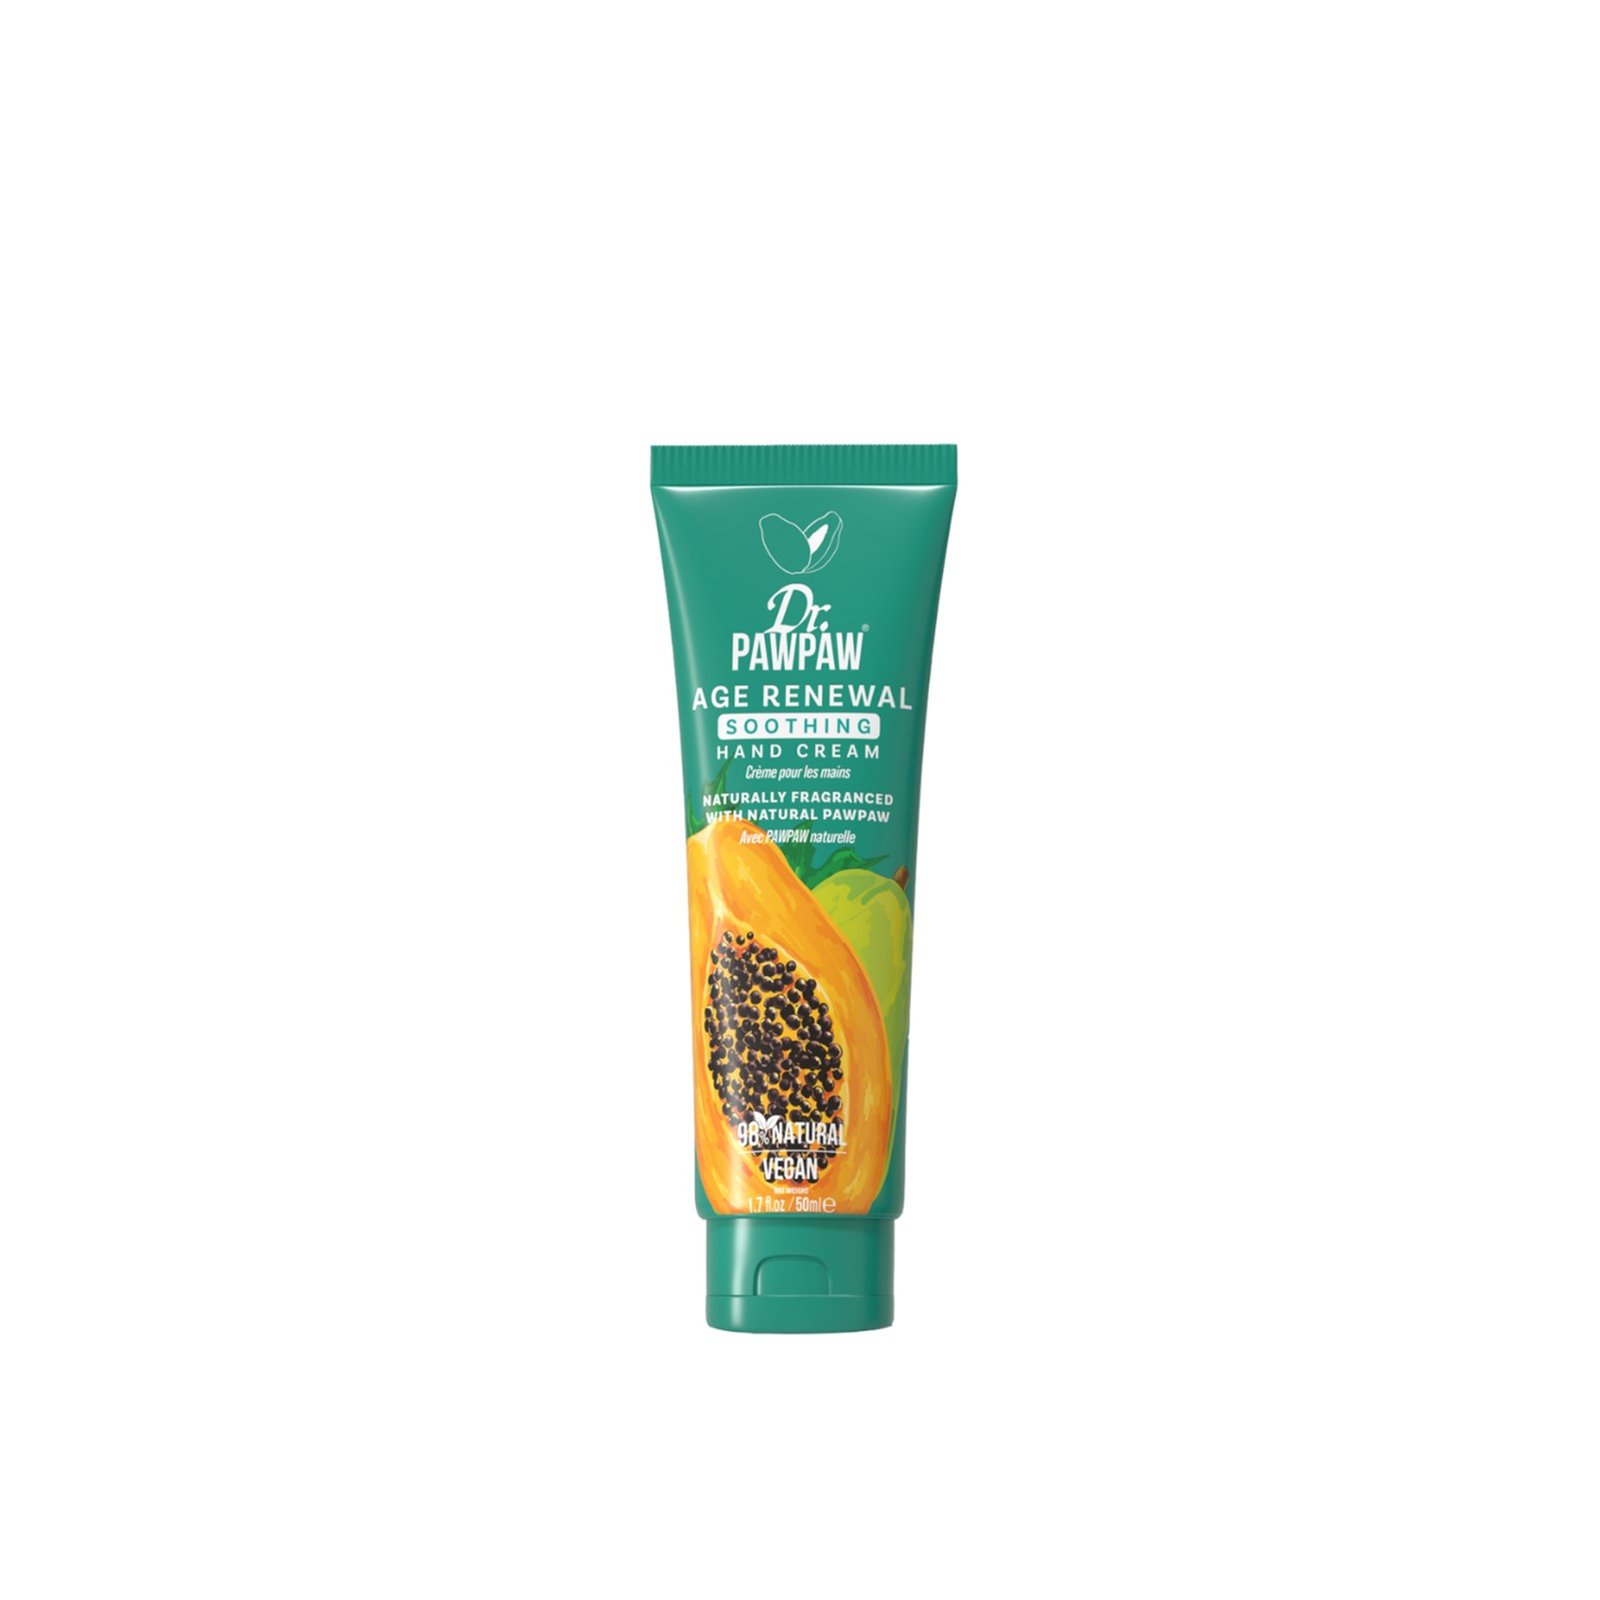 Dr. PawPaw Age Renewal Soothing Hand Cream 50ml